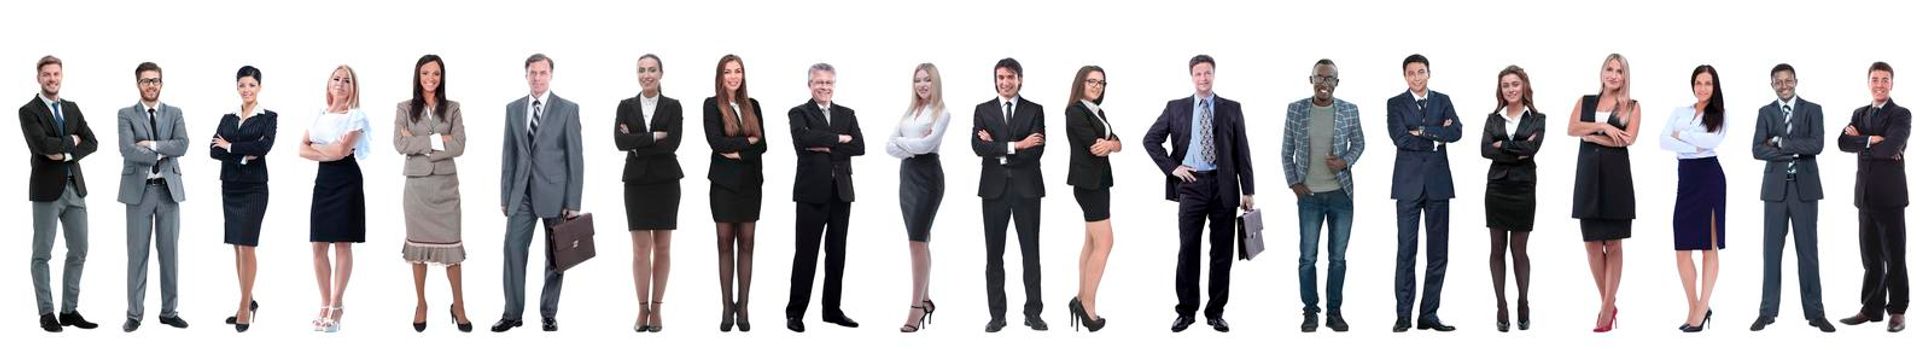 Business people standing in row over white background